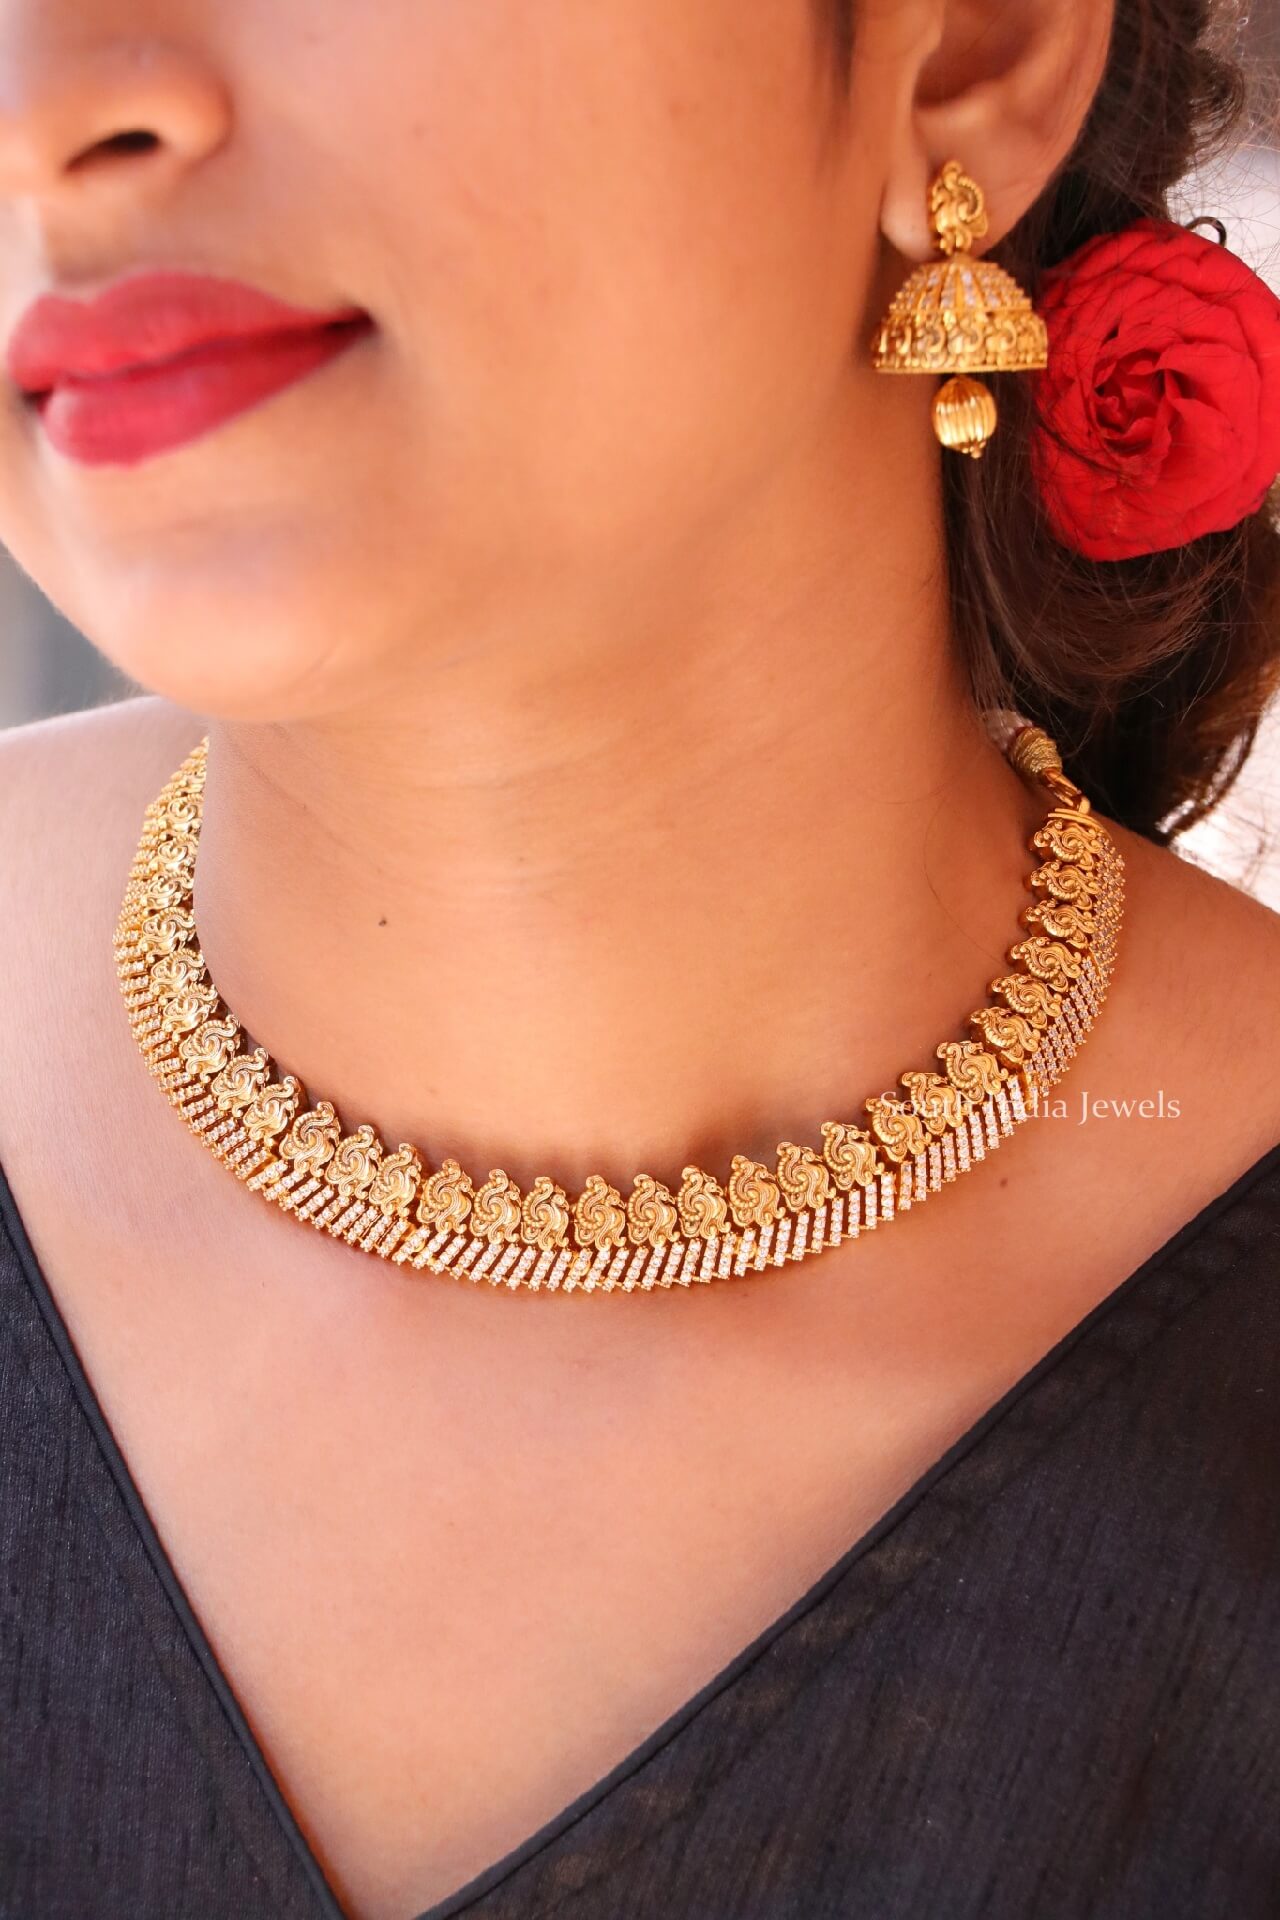 Buy quality 916 Gold Lite Weight Fancy Design Necklace in Ahmedabad